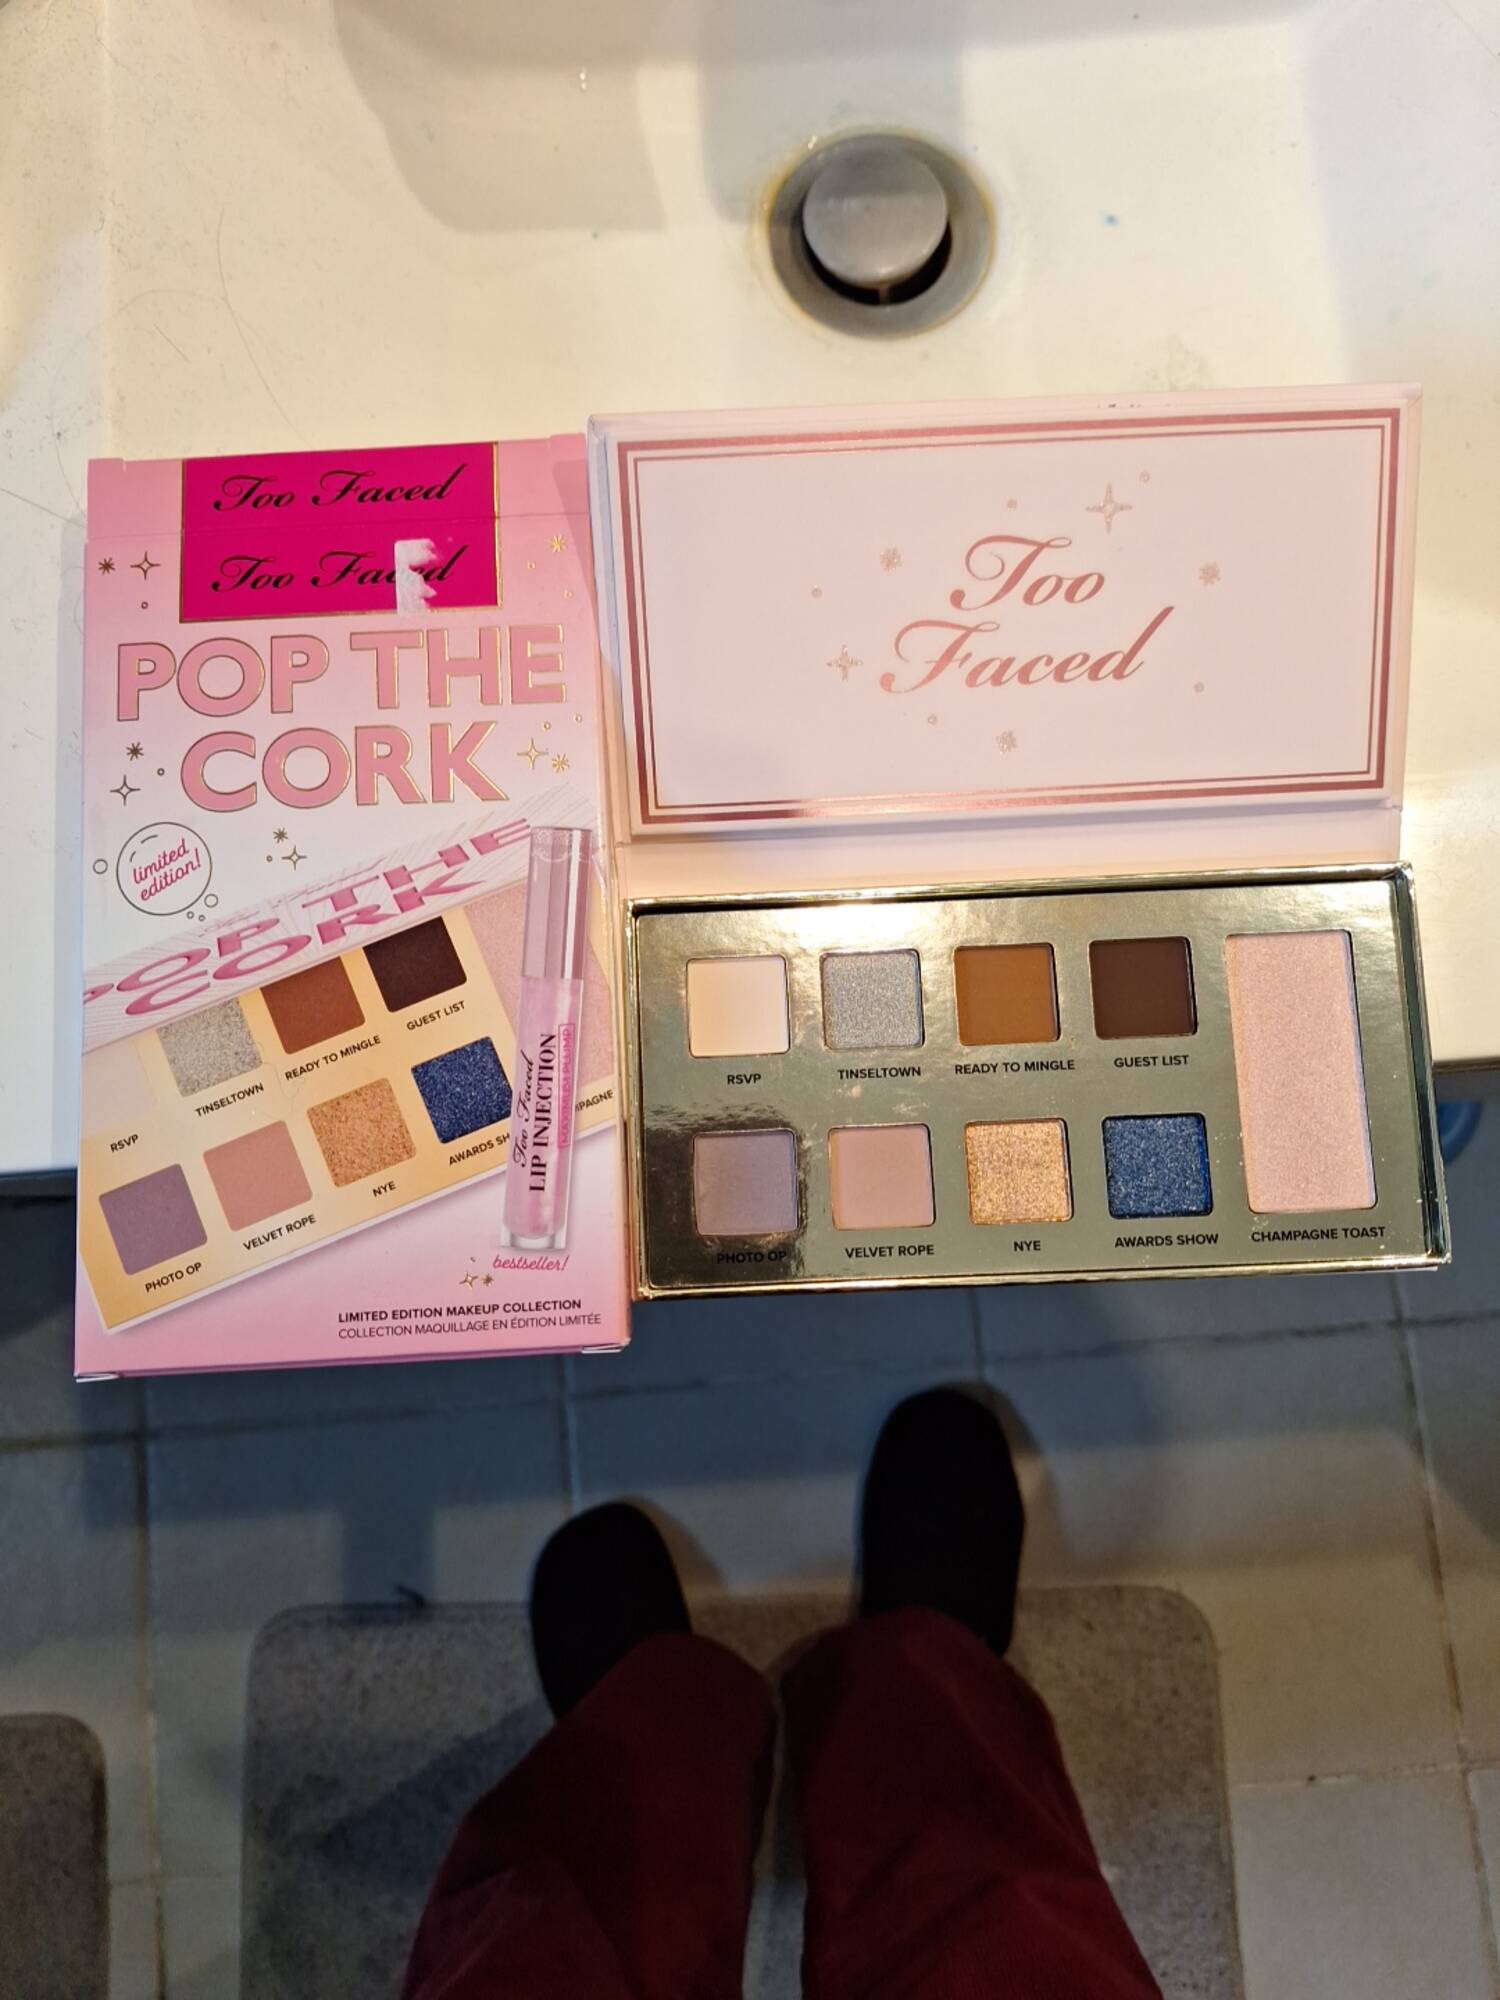 TOO FACED - Pop the cork - Coffret maquillage